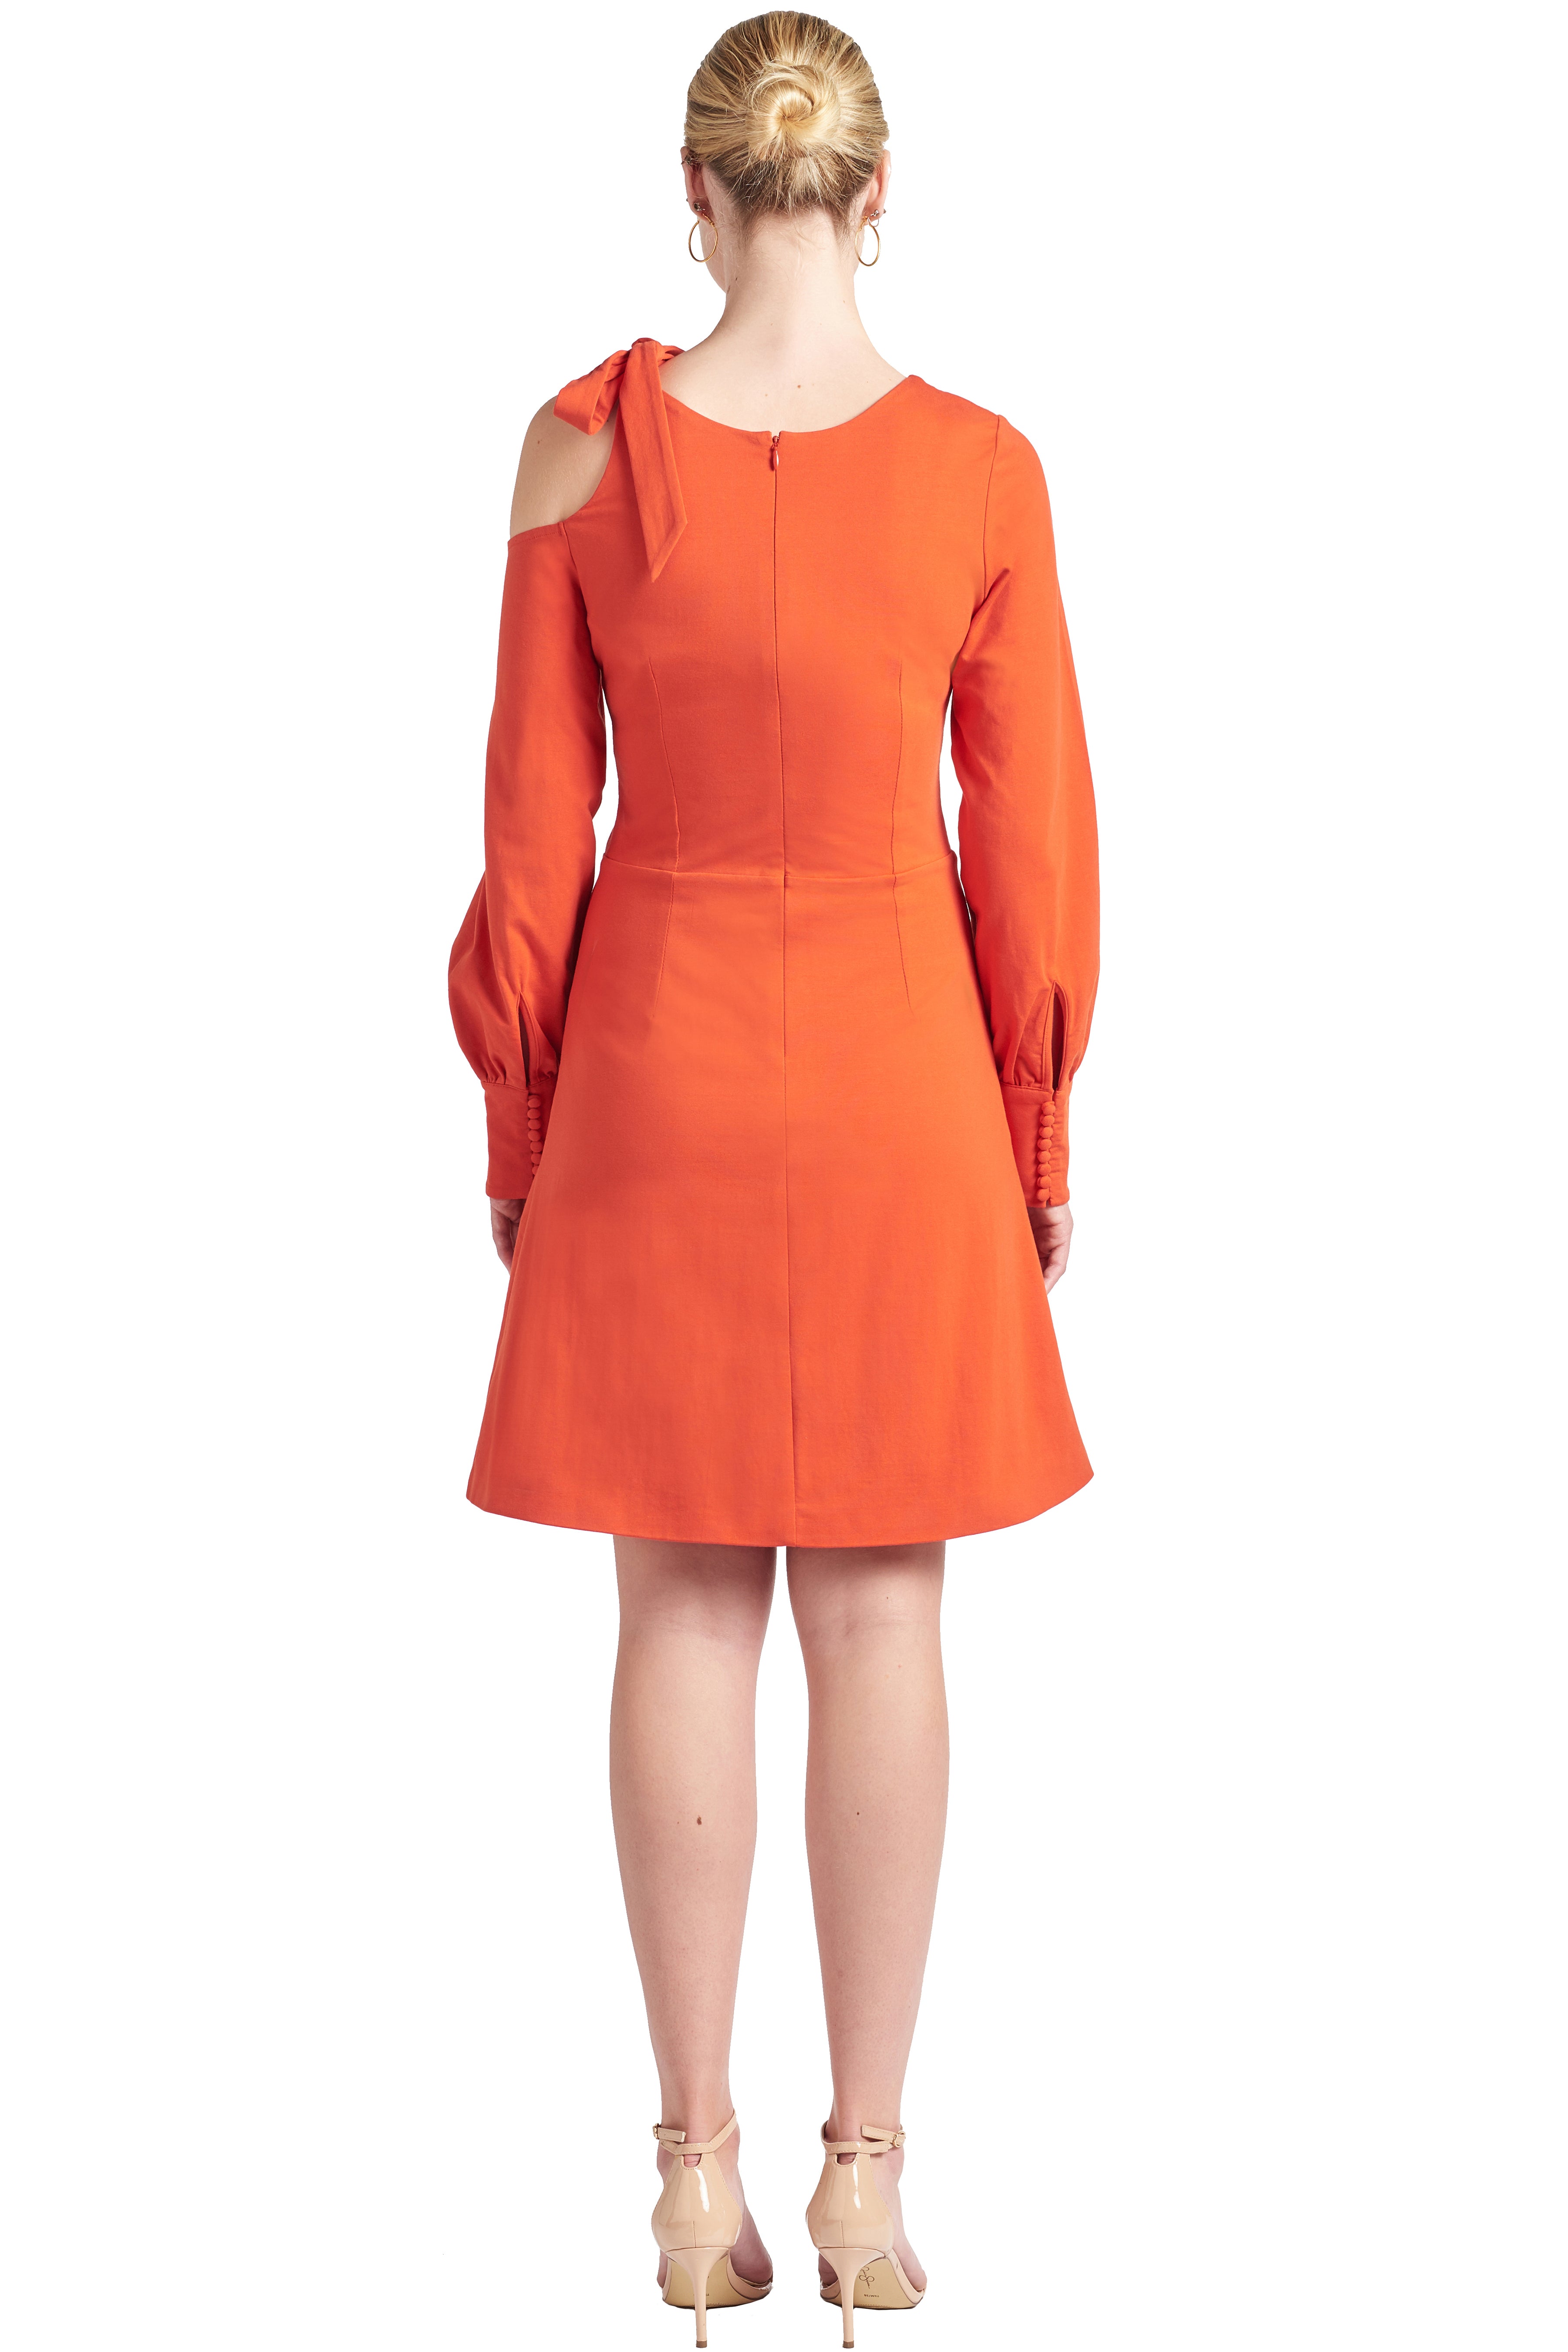 Back view of model wearing fit & flare orange colored long sleeve dress with single shoulder cut-out and shoulder bow-tie.